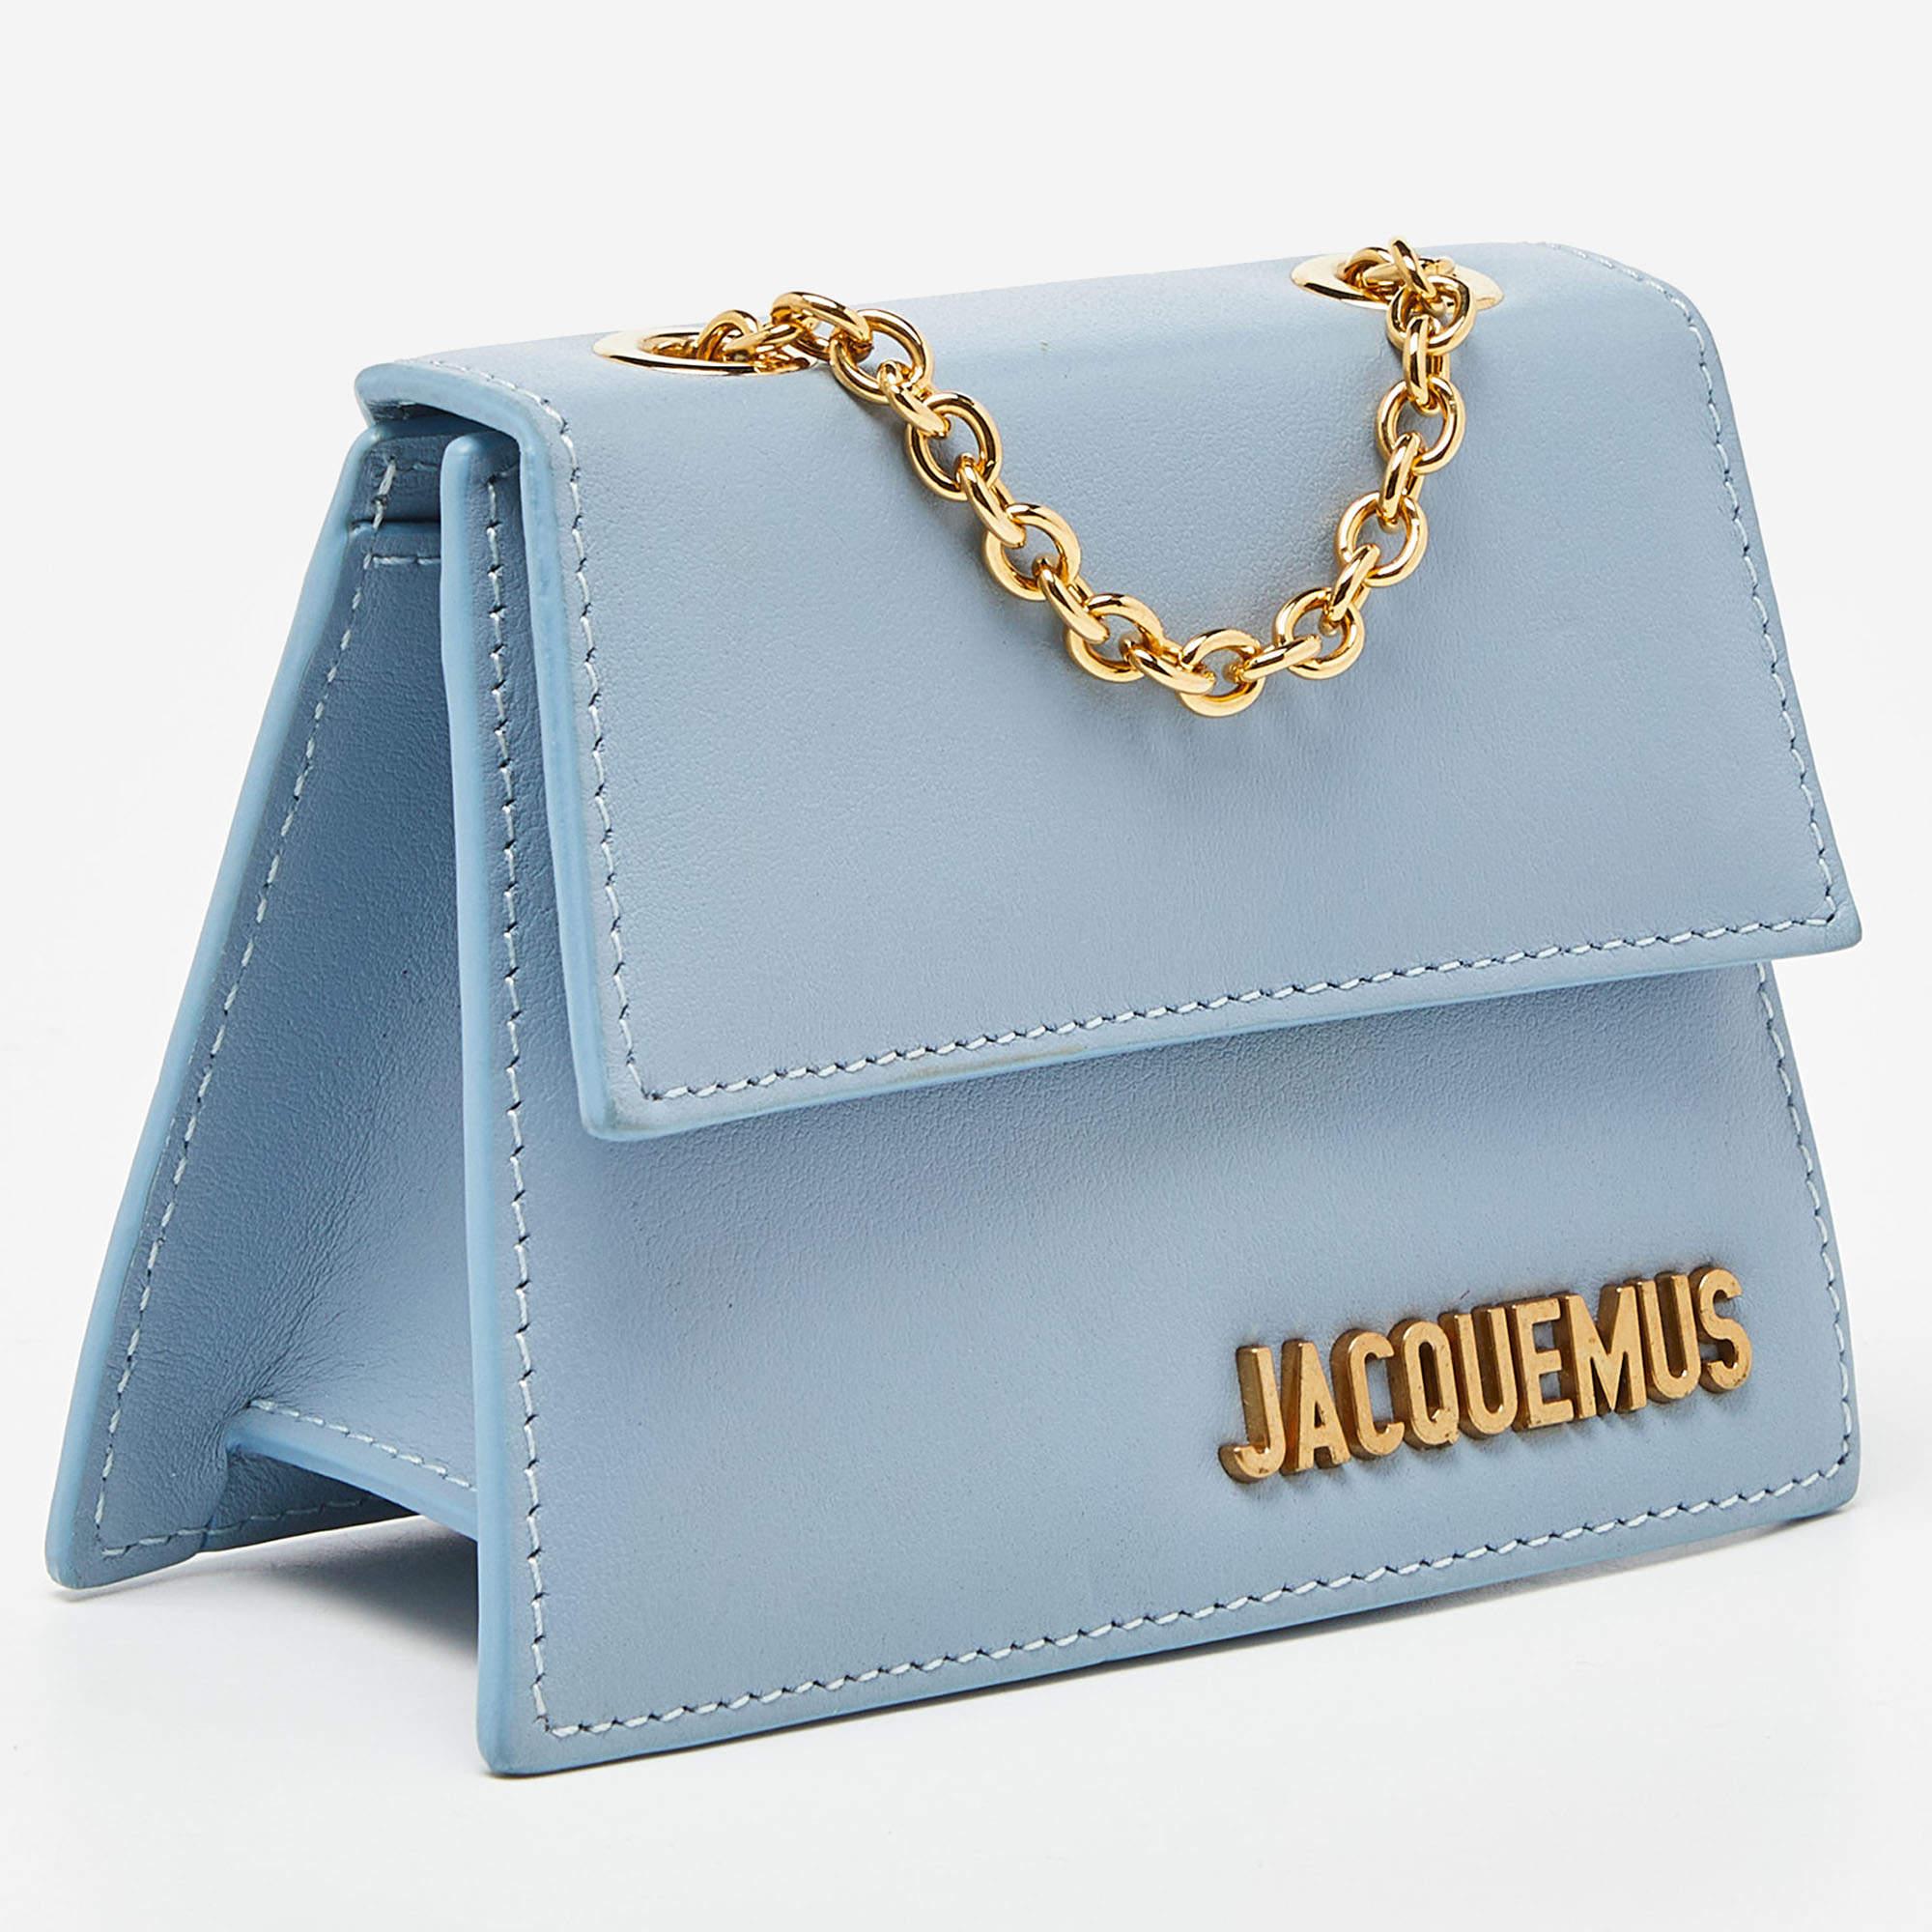 A Jacquemus bag to light your style from simple to fashionable! Crafted with expertise, the flap bag has a petite size, a light blue hue, a gold-tone shoulder chain, and the brand detail on the front.

